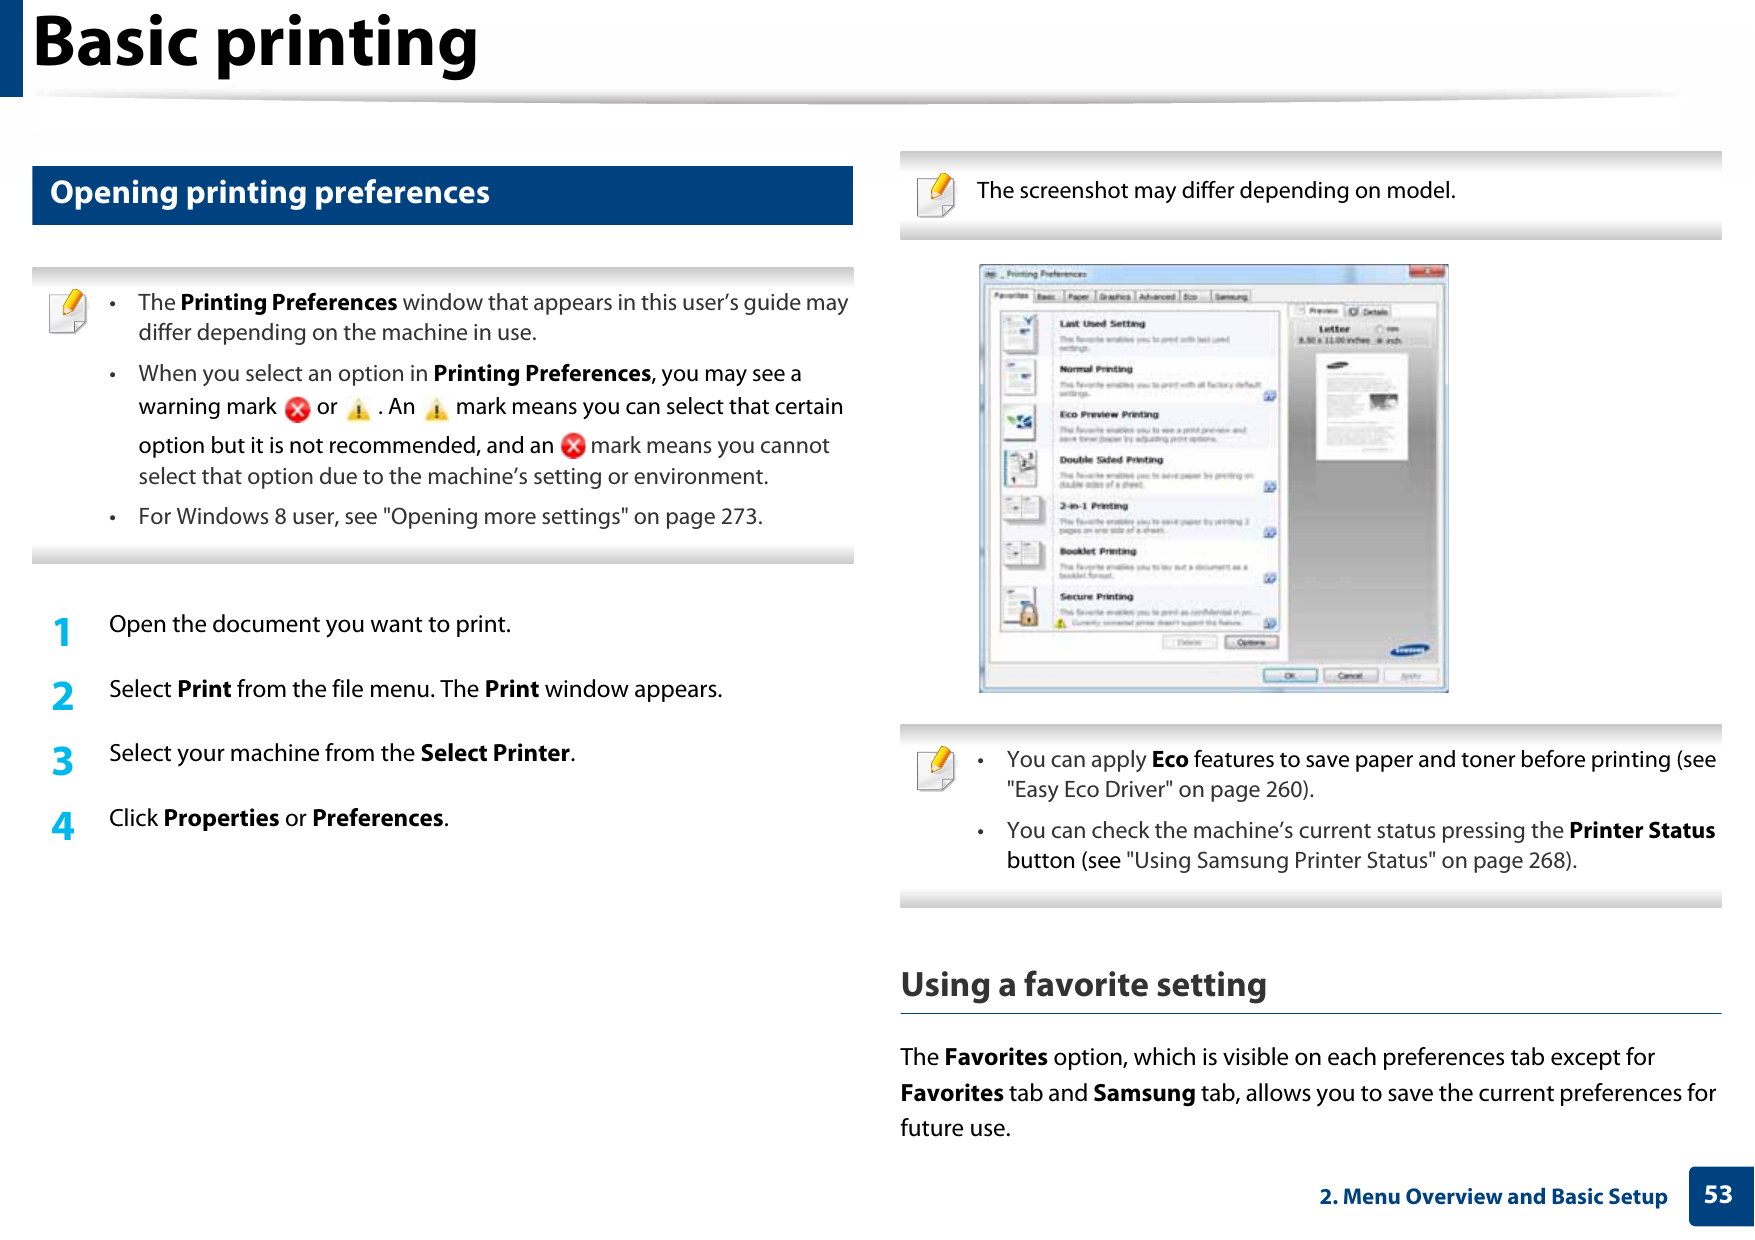 Basic printing532. Menu Overview and Basic Setup12 Opening printing preferences • The Printing Preferences window that appears in this user’s guide may differ depending on the machine in use. • When you select an option in Printing Preferences, you may see a warning mark   or   . An   mark means you can select that certain option but it is not recommended, and an   mark means you cannot select that option due to the machine’s setting or environment.• For Windows 8 user, see &quot;Opening more settings&quot; on page 273. 1Open the document you want to print.2  Select Print from the file menu. The Print window appears. 3  Select your machine from the Select Printer. 4  Click Properties or Preferences.  The screenshot may differ depending on model.  • You can apply Eco features to save paper and toner before printing (see &quot;Easy Eco Driver&quot; on page 260).• You can check the machine’s current status pressing the Printer Status button (see &quot;Using Samsung Printer Status&quot; on page 268). Using a favorite settingThe Favorites option, which is visible on each preferences tab except for Favorites tab and Samsung tab, allows you to save the current preferences for future use.